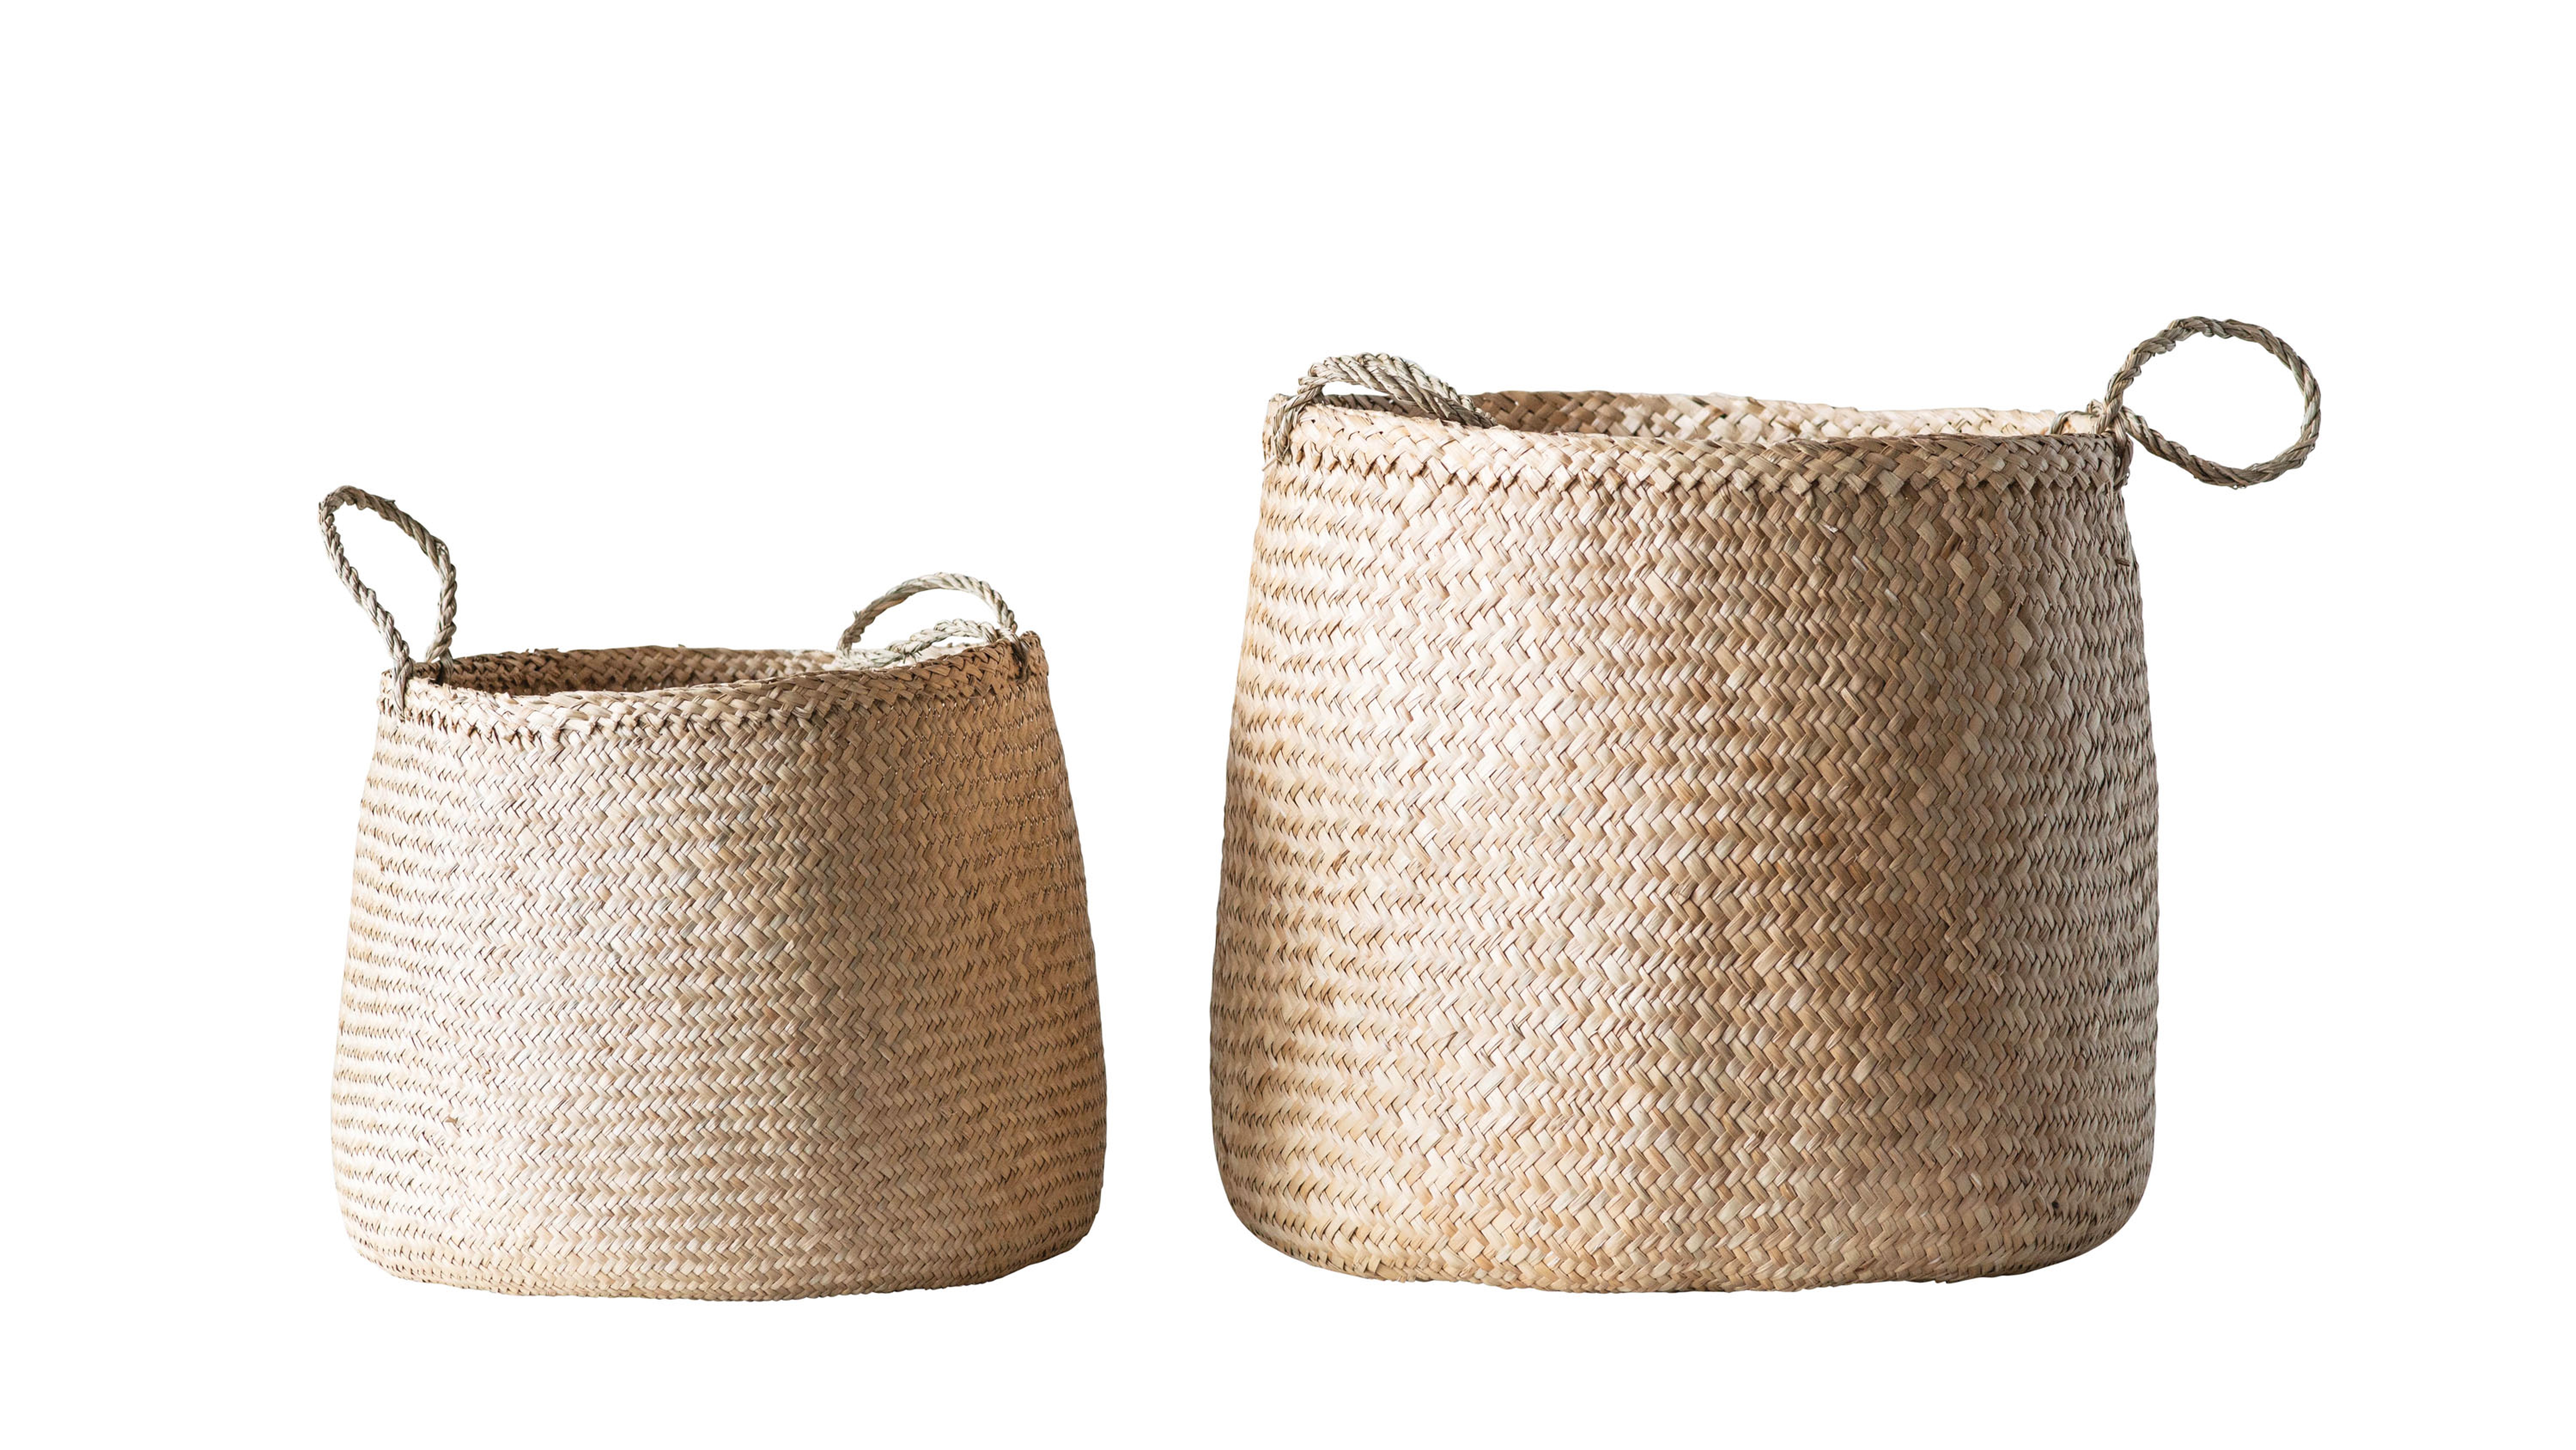 Beige Woven Seagrass Basket with Handles (Set of 2 Sizes) - Nomad Home